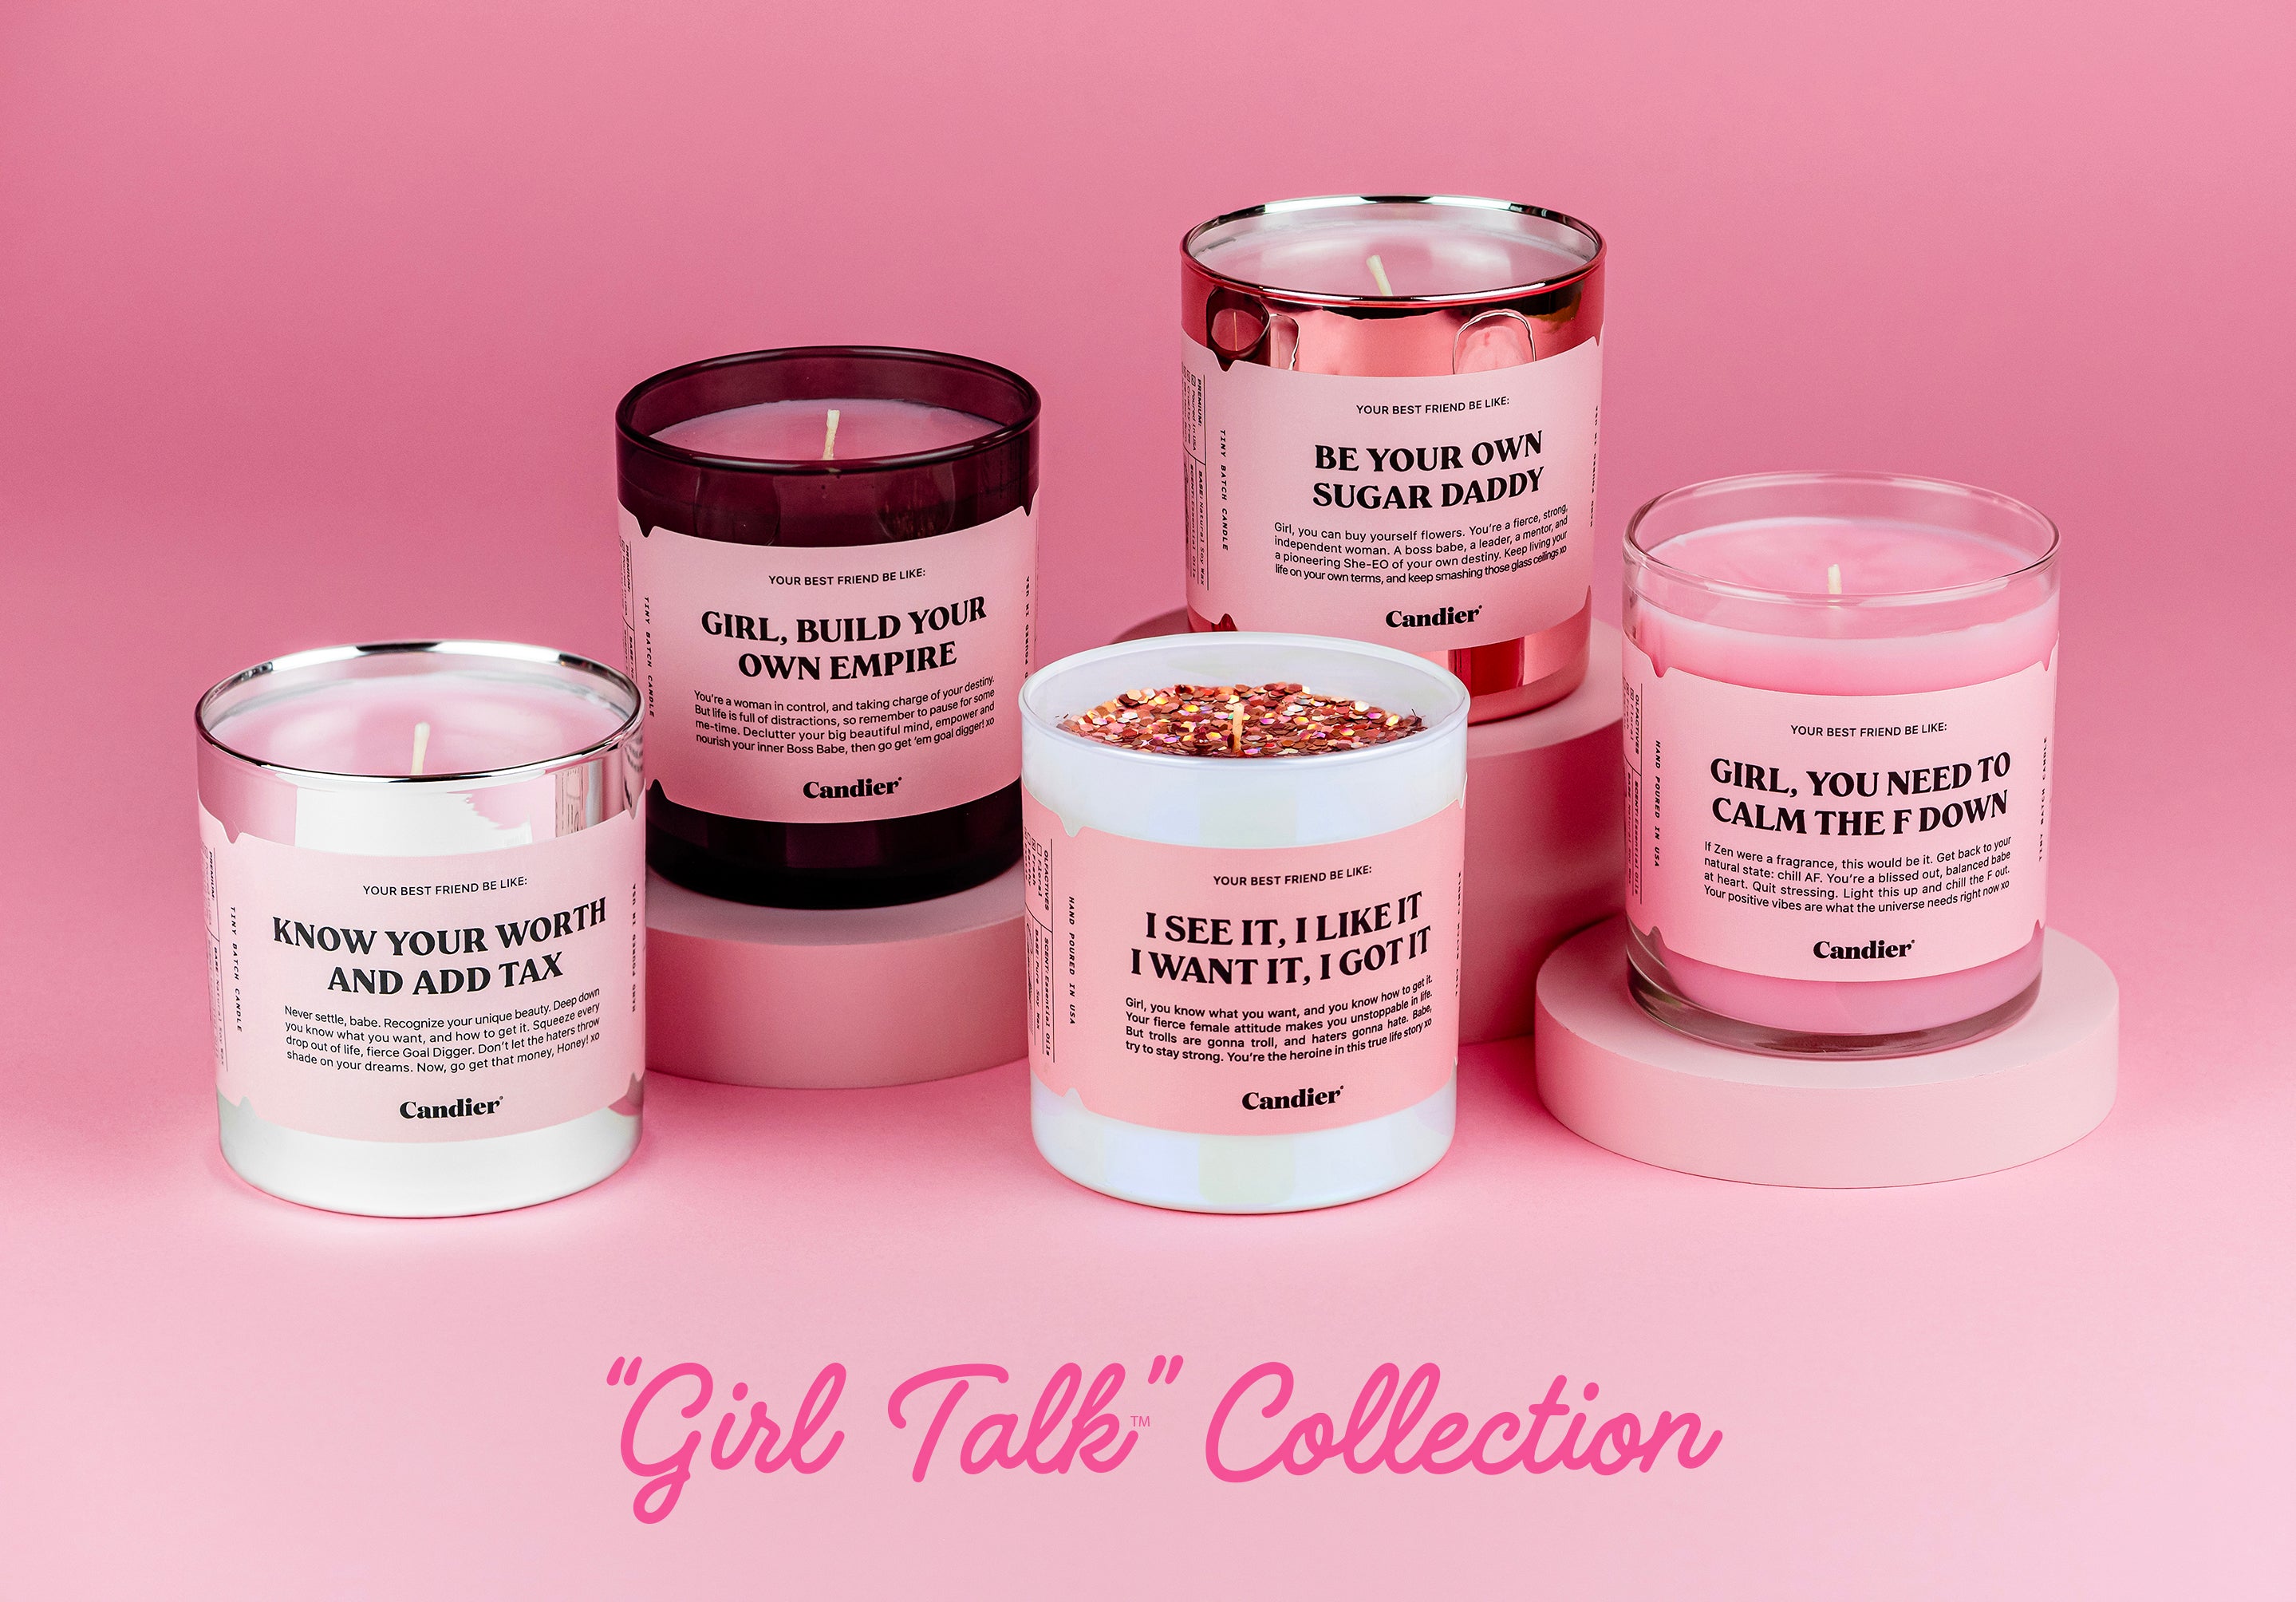 The Girl Talk candle collection with female empowerment themed candles with motivational and inspirational messages